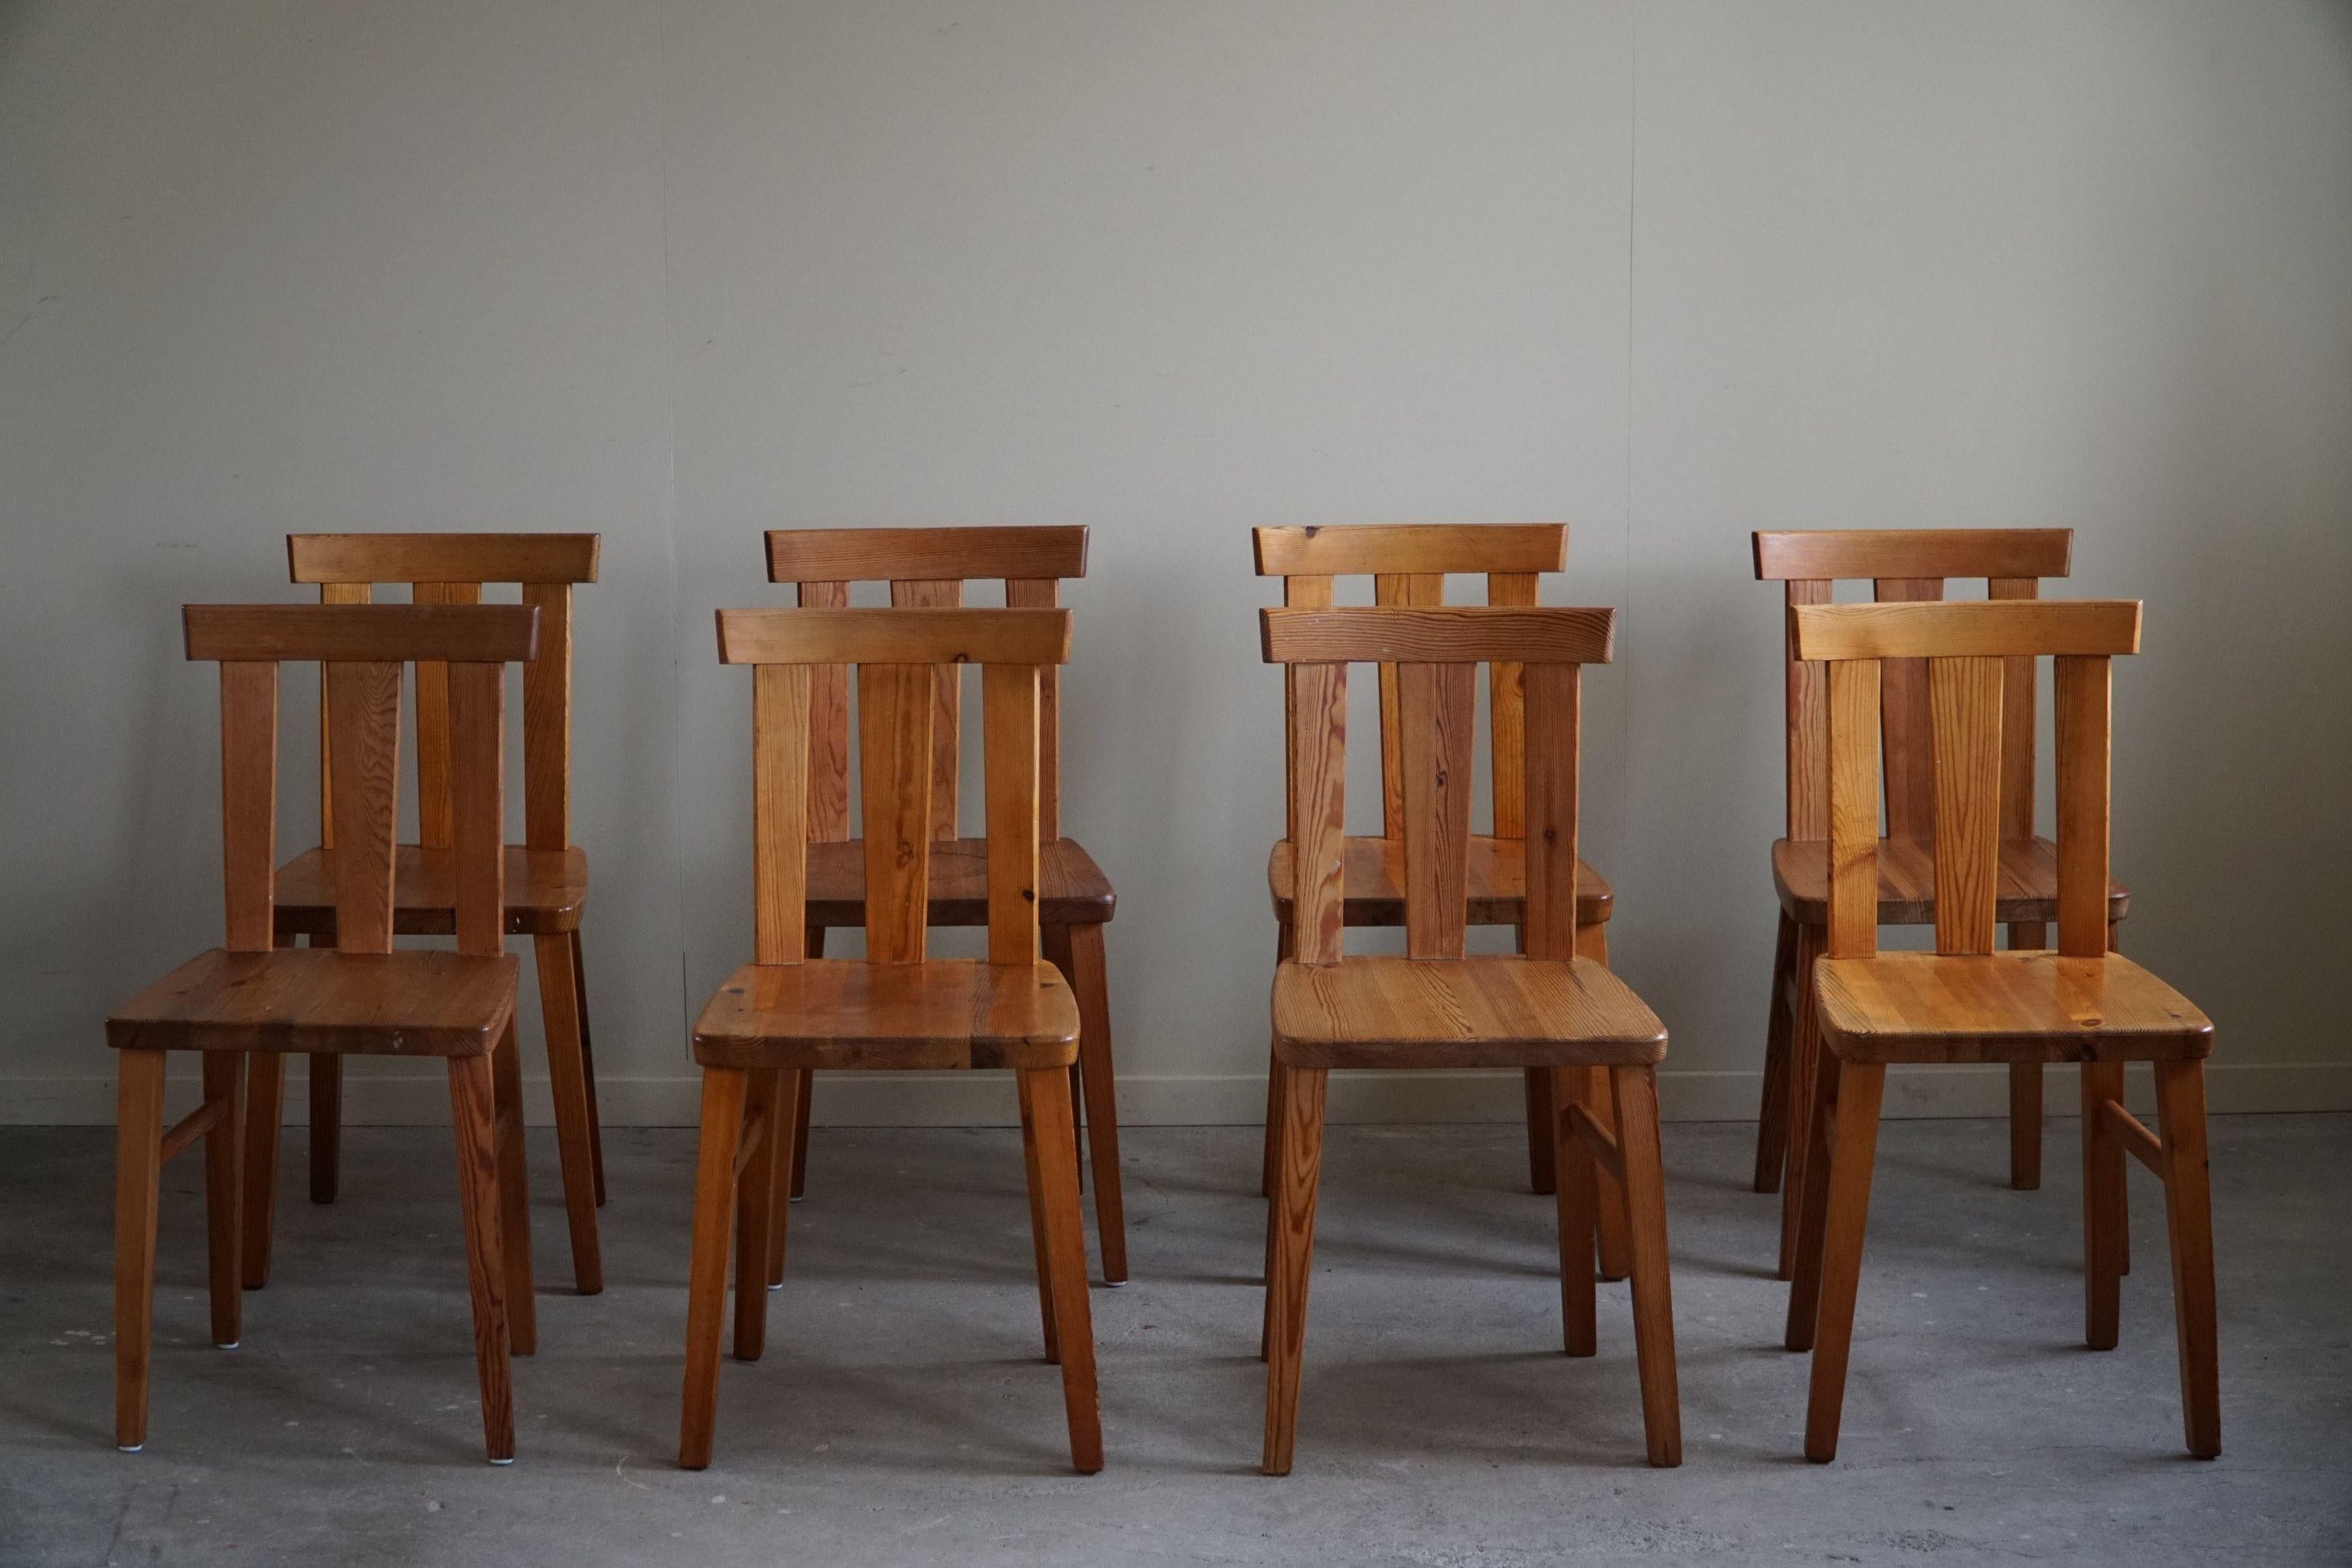 Hand-Crafted Swedish Modern, Set of 8 Chairs in Solid Pine, Axel Einar Hjorth Style, 1950s For Sale